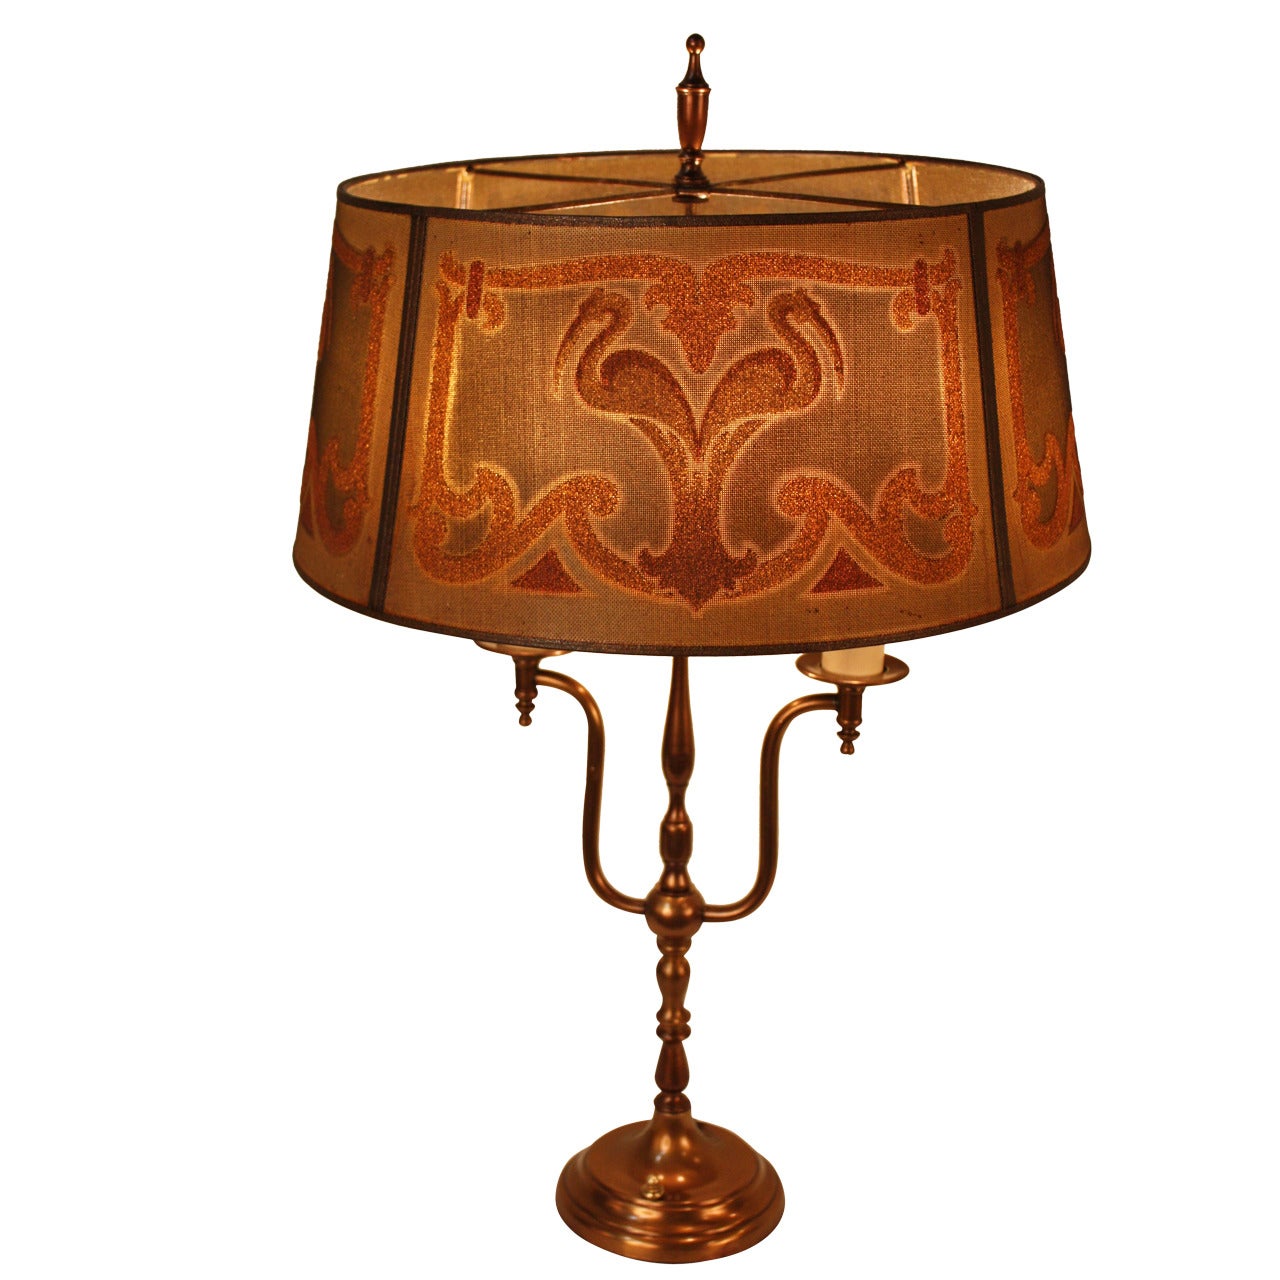 Art Deco Table Lamp by Mutual Sunset Lamp Company